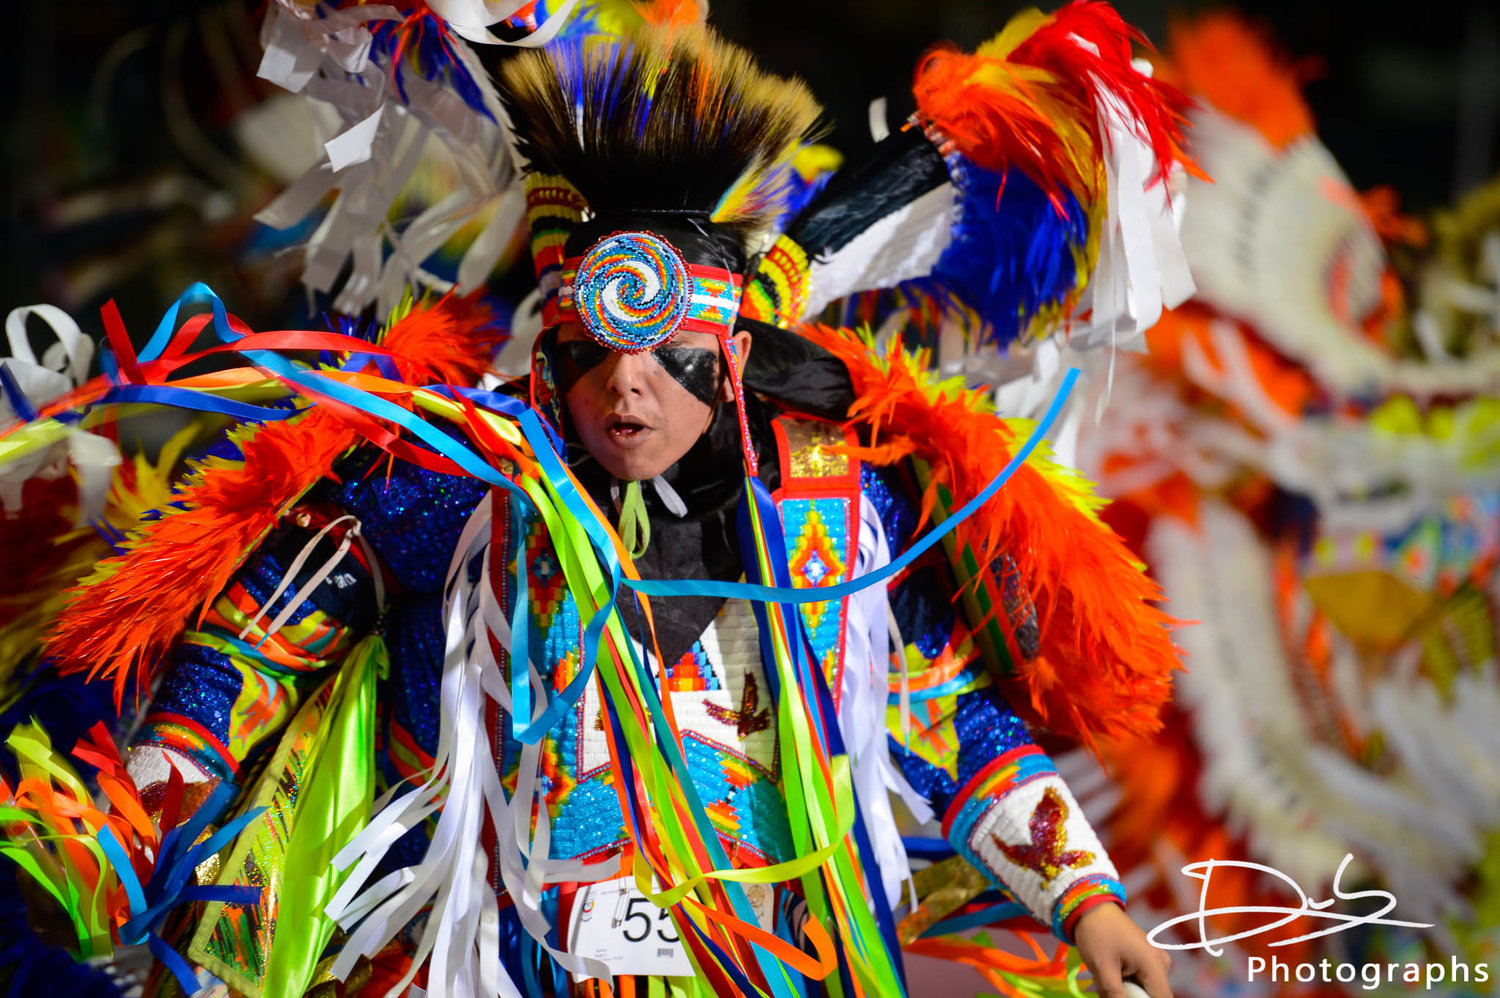 Powwow Dancer Google image from First Nations University of Canada Annual Spring Celebration Pow Wow, April 21 & 22, 2018 - https://www.fnunivpowwow.ca/dancers-singers-drummers/